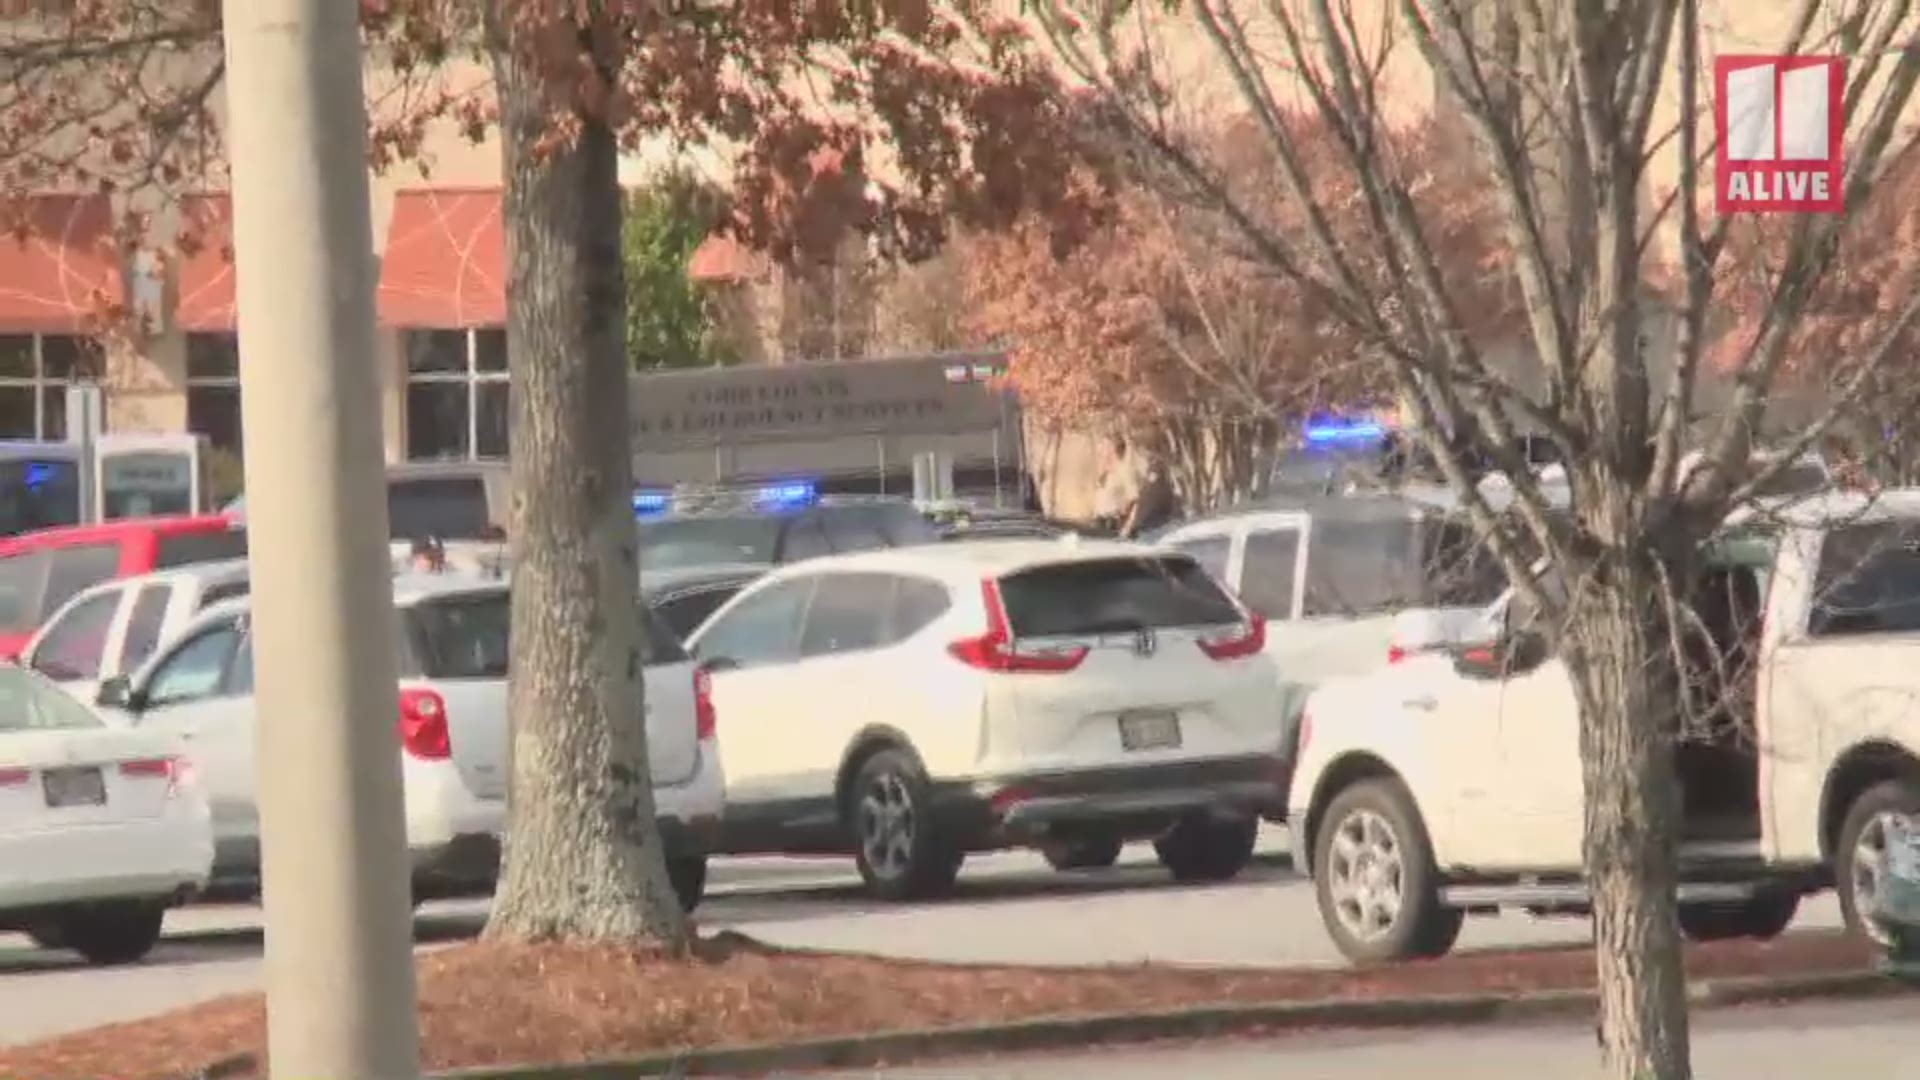 Police responded to reports of shots fired at Cumberland Mall early Saturday afternoon.